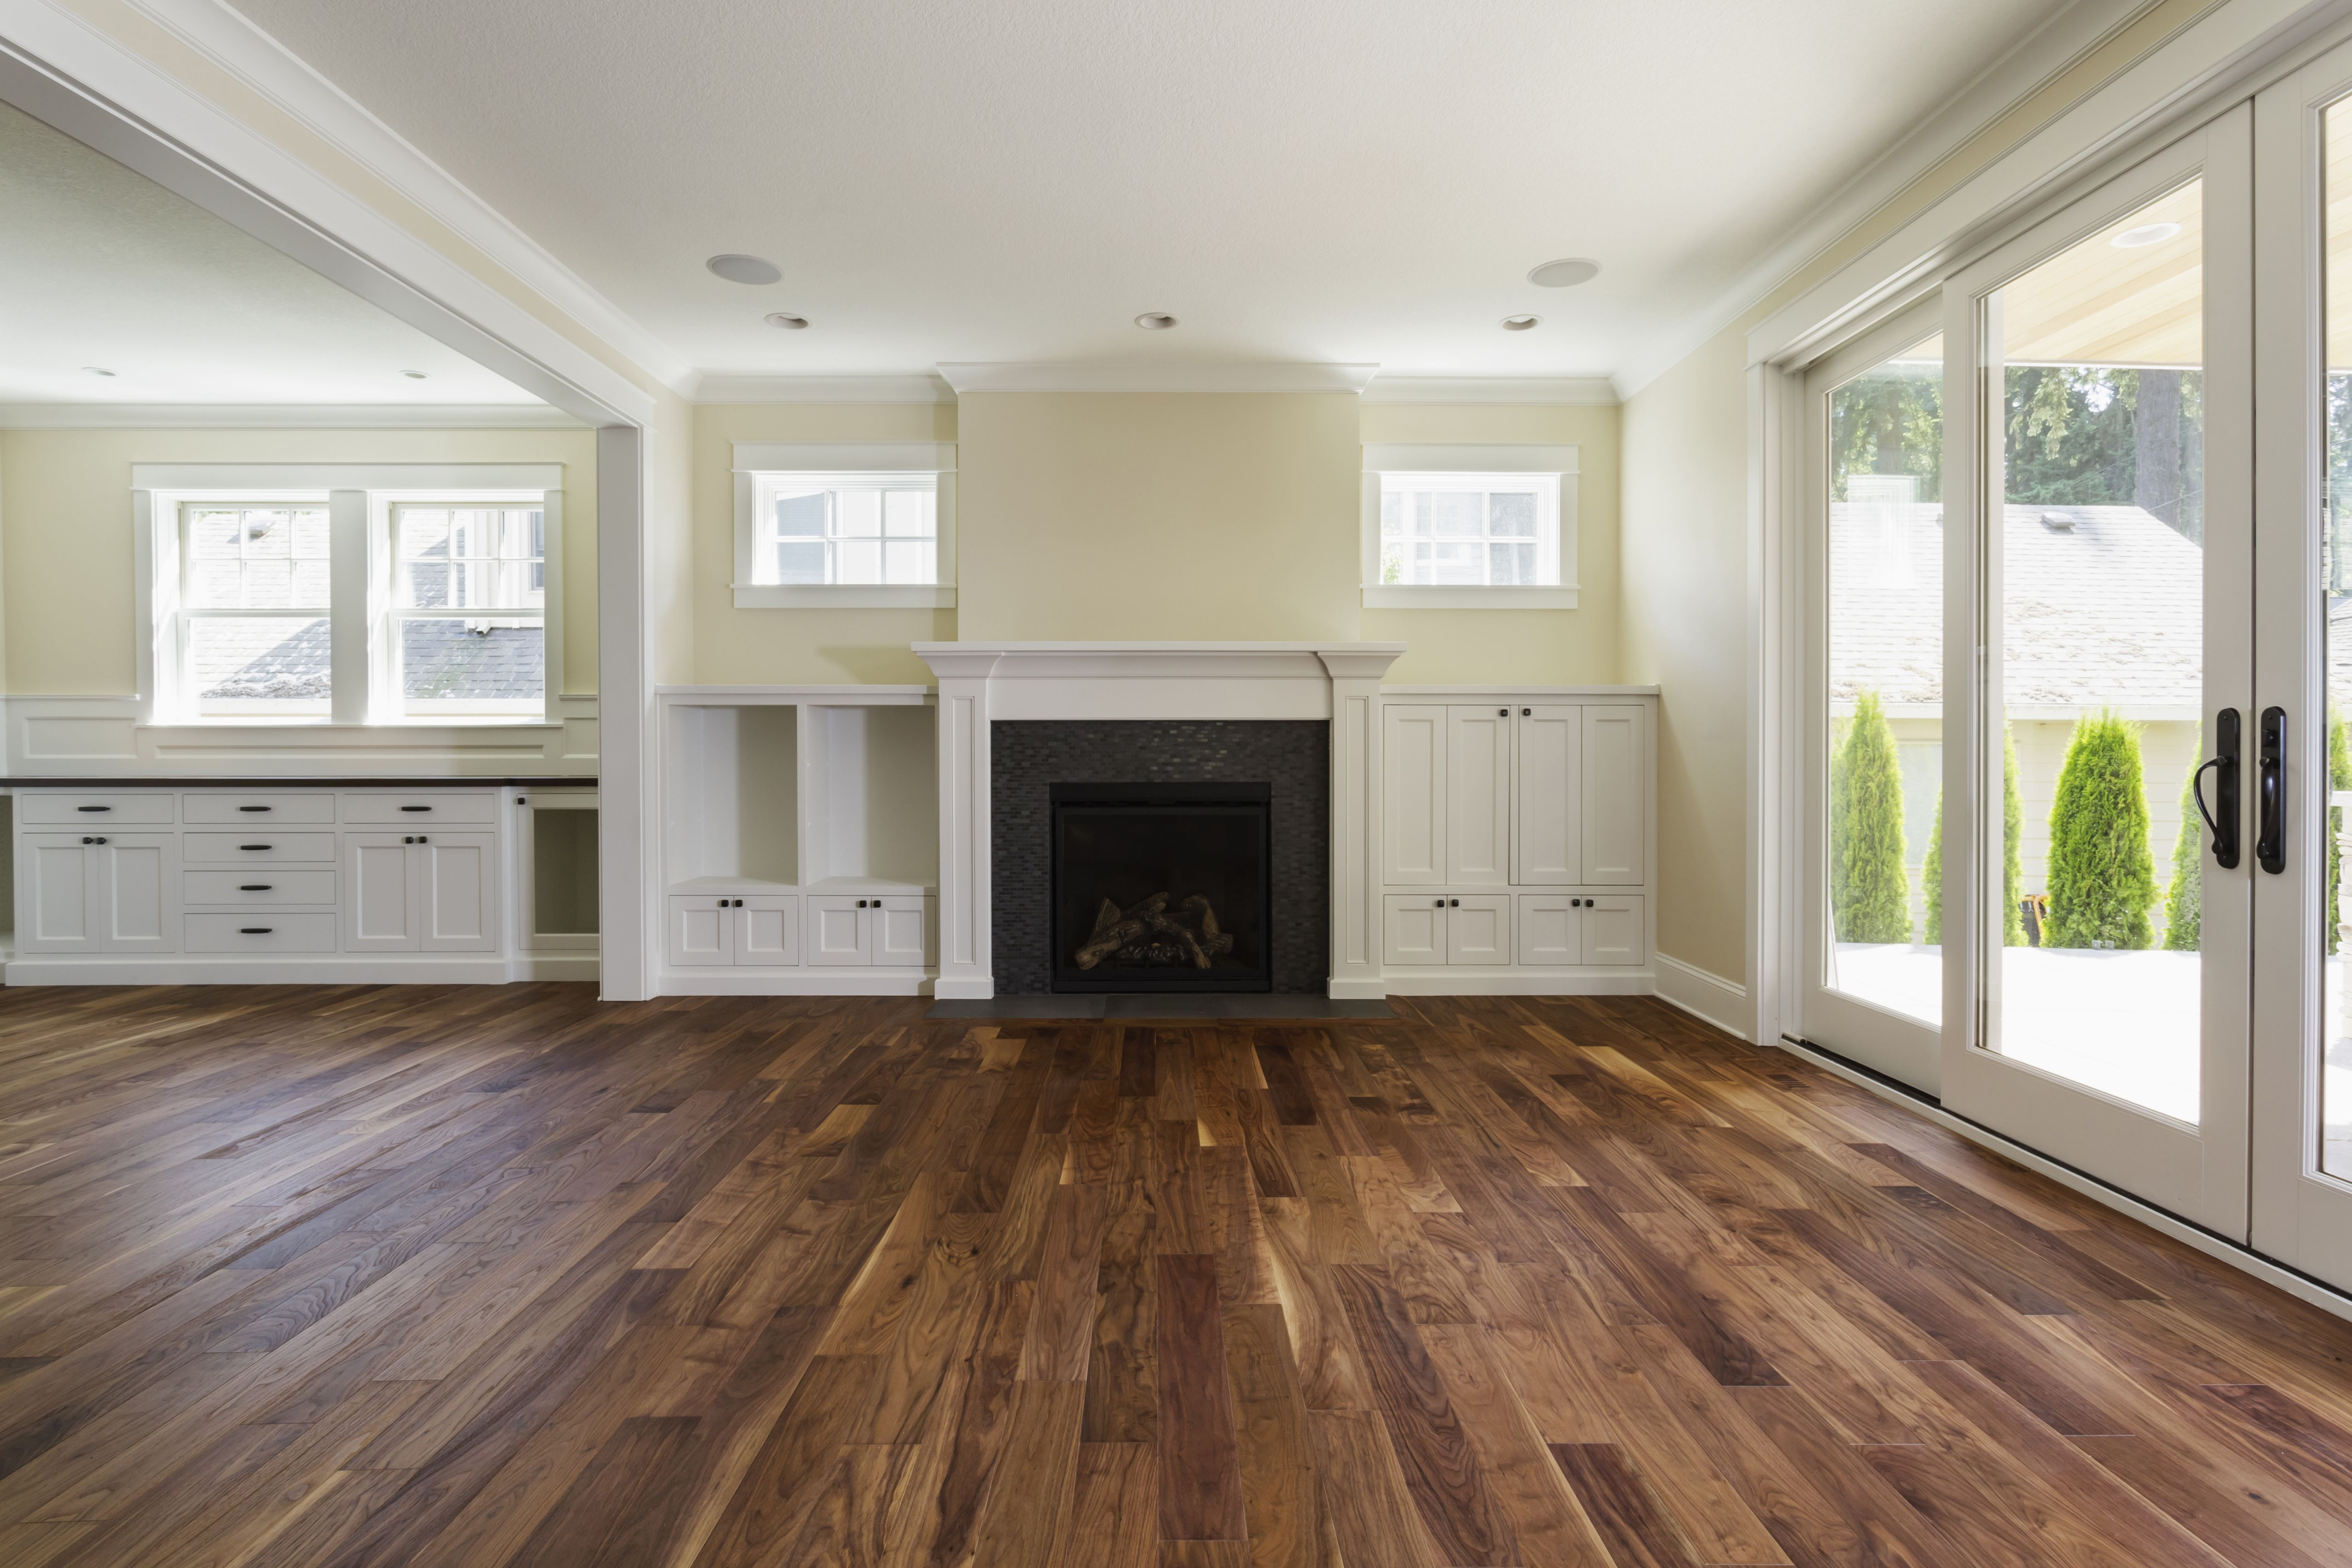 23 Famous Hardwood Flooring Floor and Decor 2024 free download hardwood flooring floor and decor of the pros and cons of prefinished hardwood flooring in fireplace and built in shelves in living room 482143011 57bef8e33df78cc16e035397